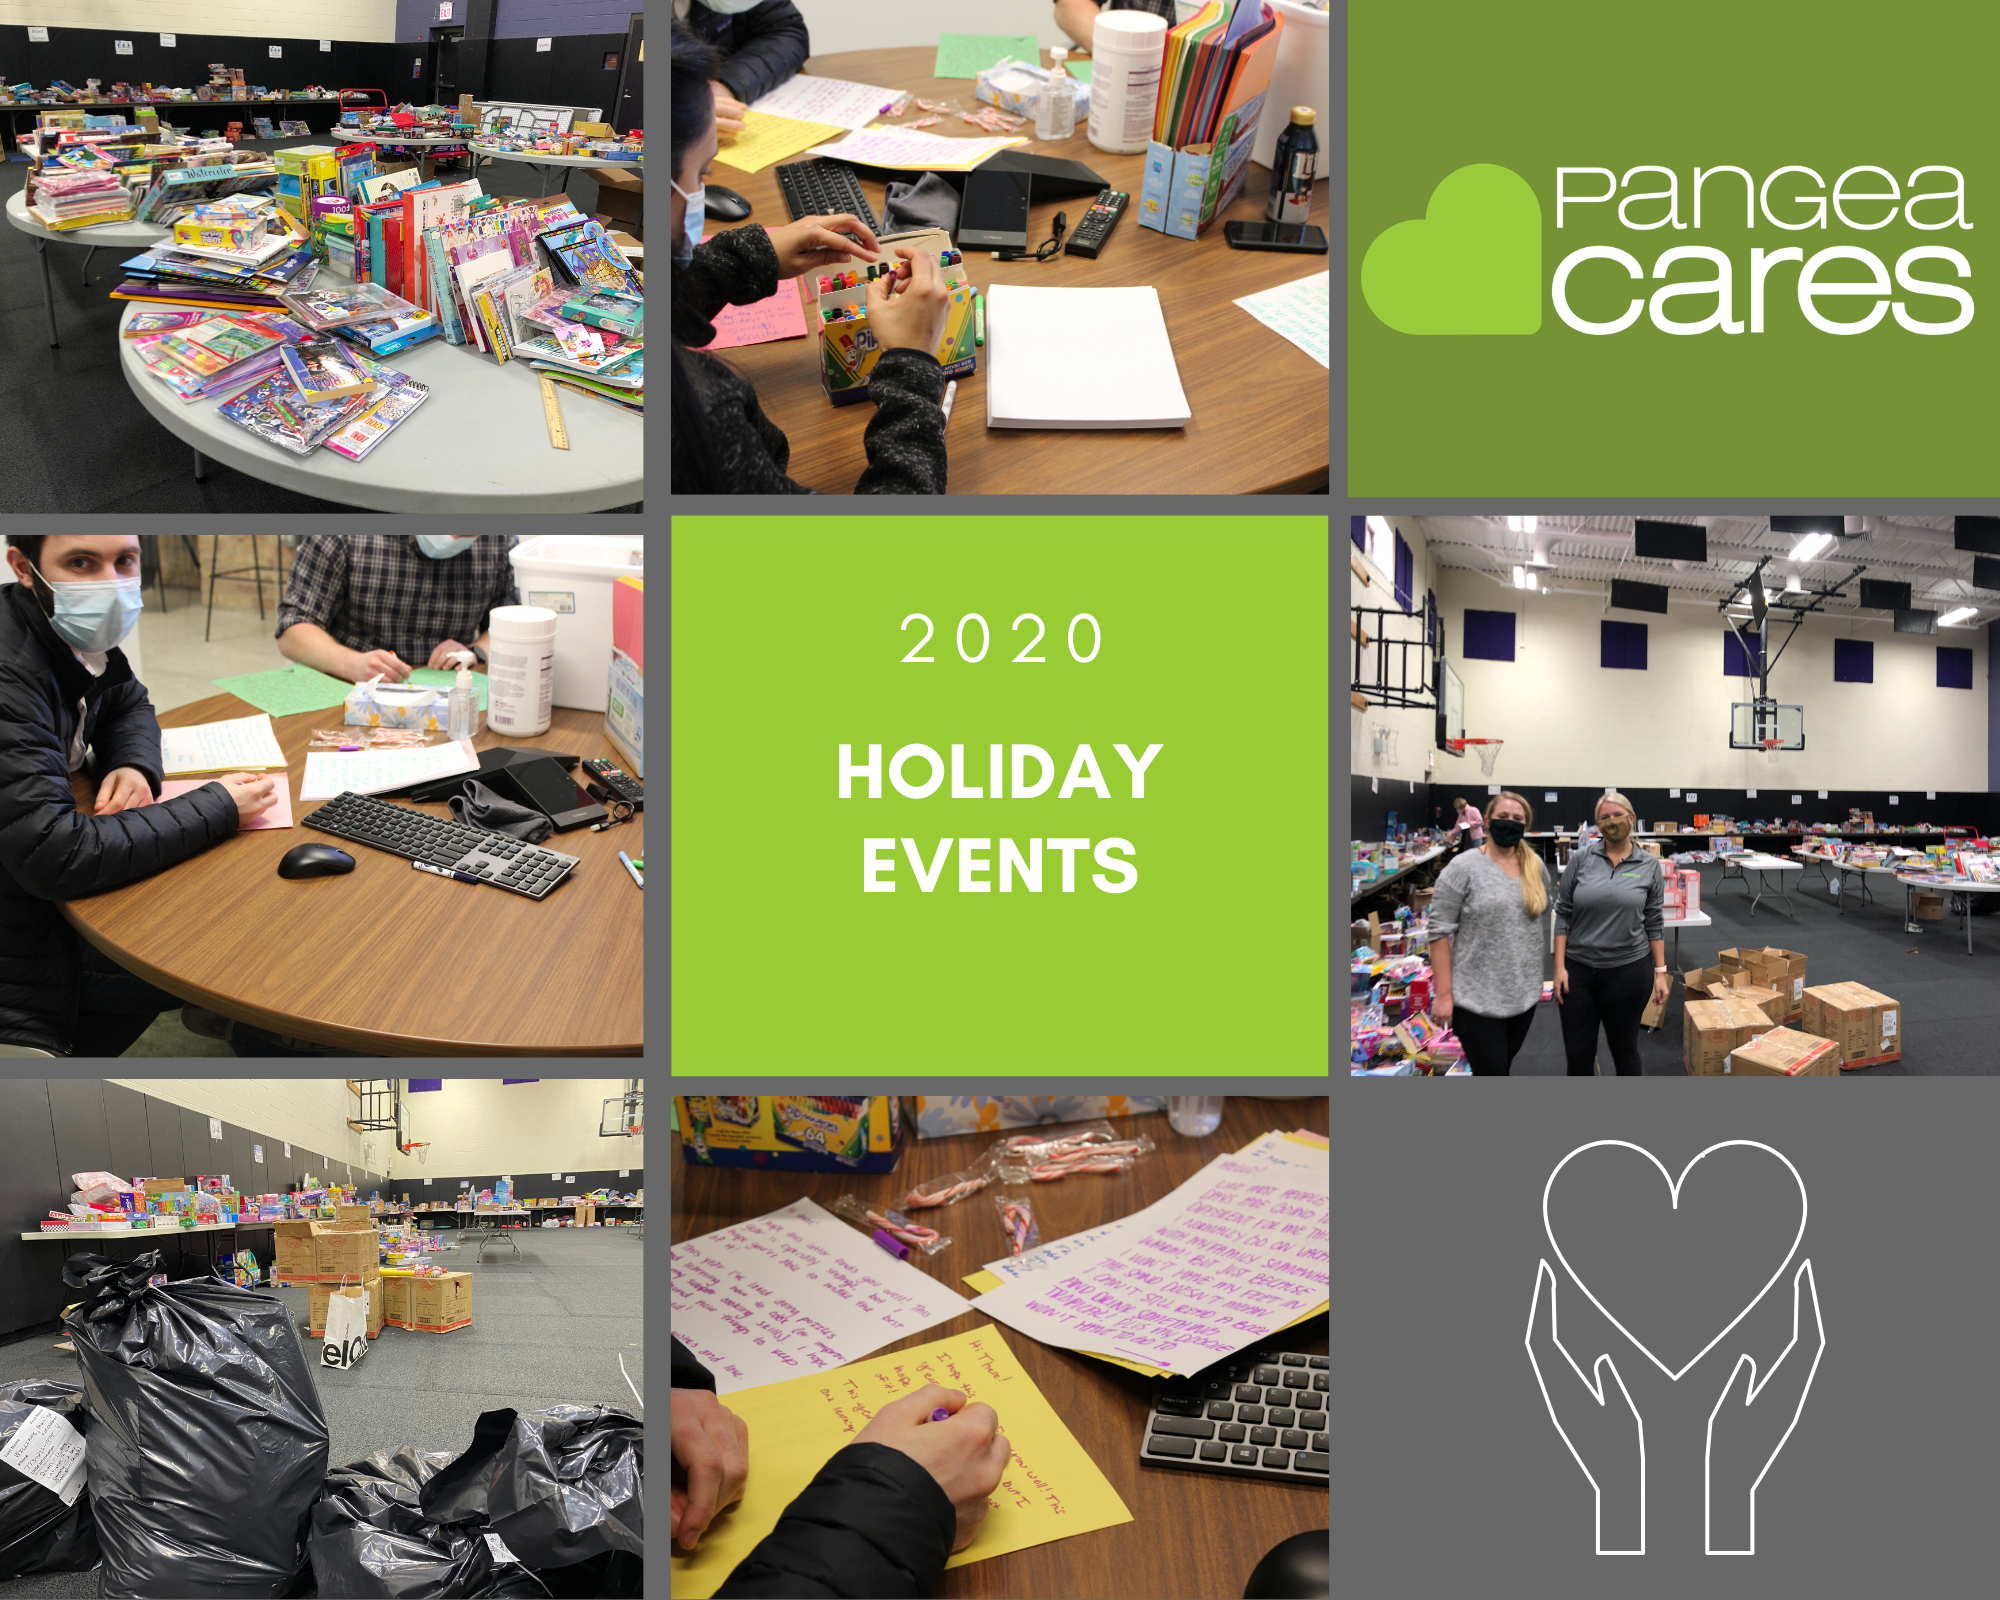 2020 Pangea Cares holiday events